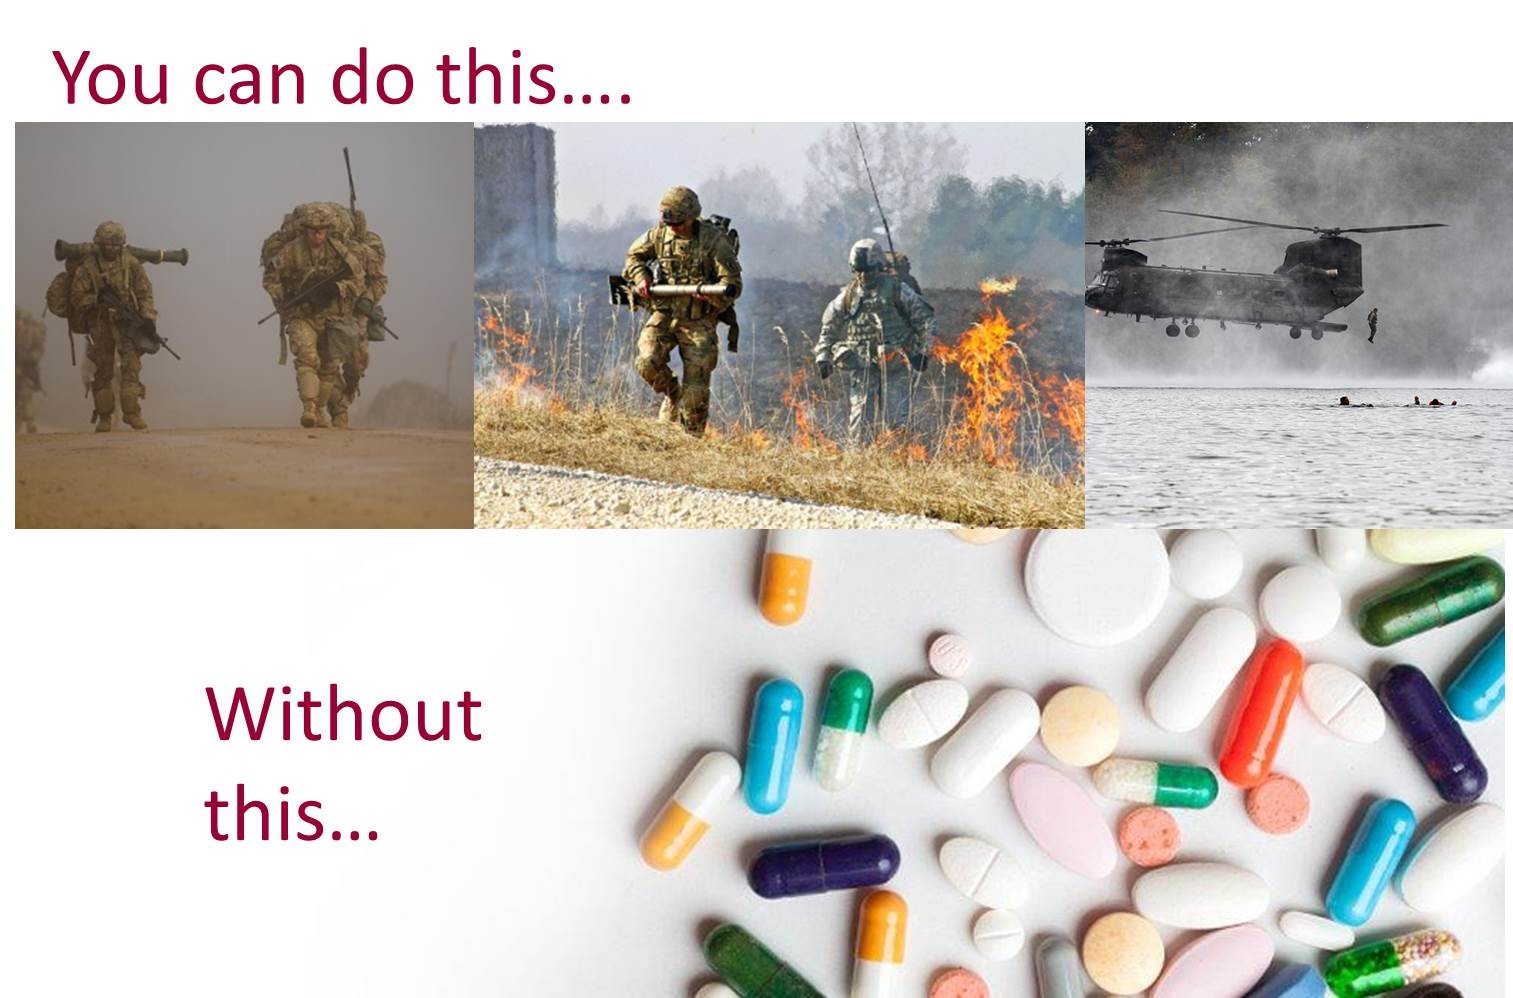 Transition of Army substance abuse program will improve health